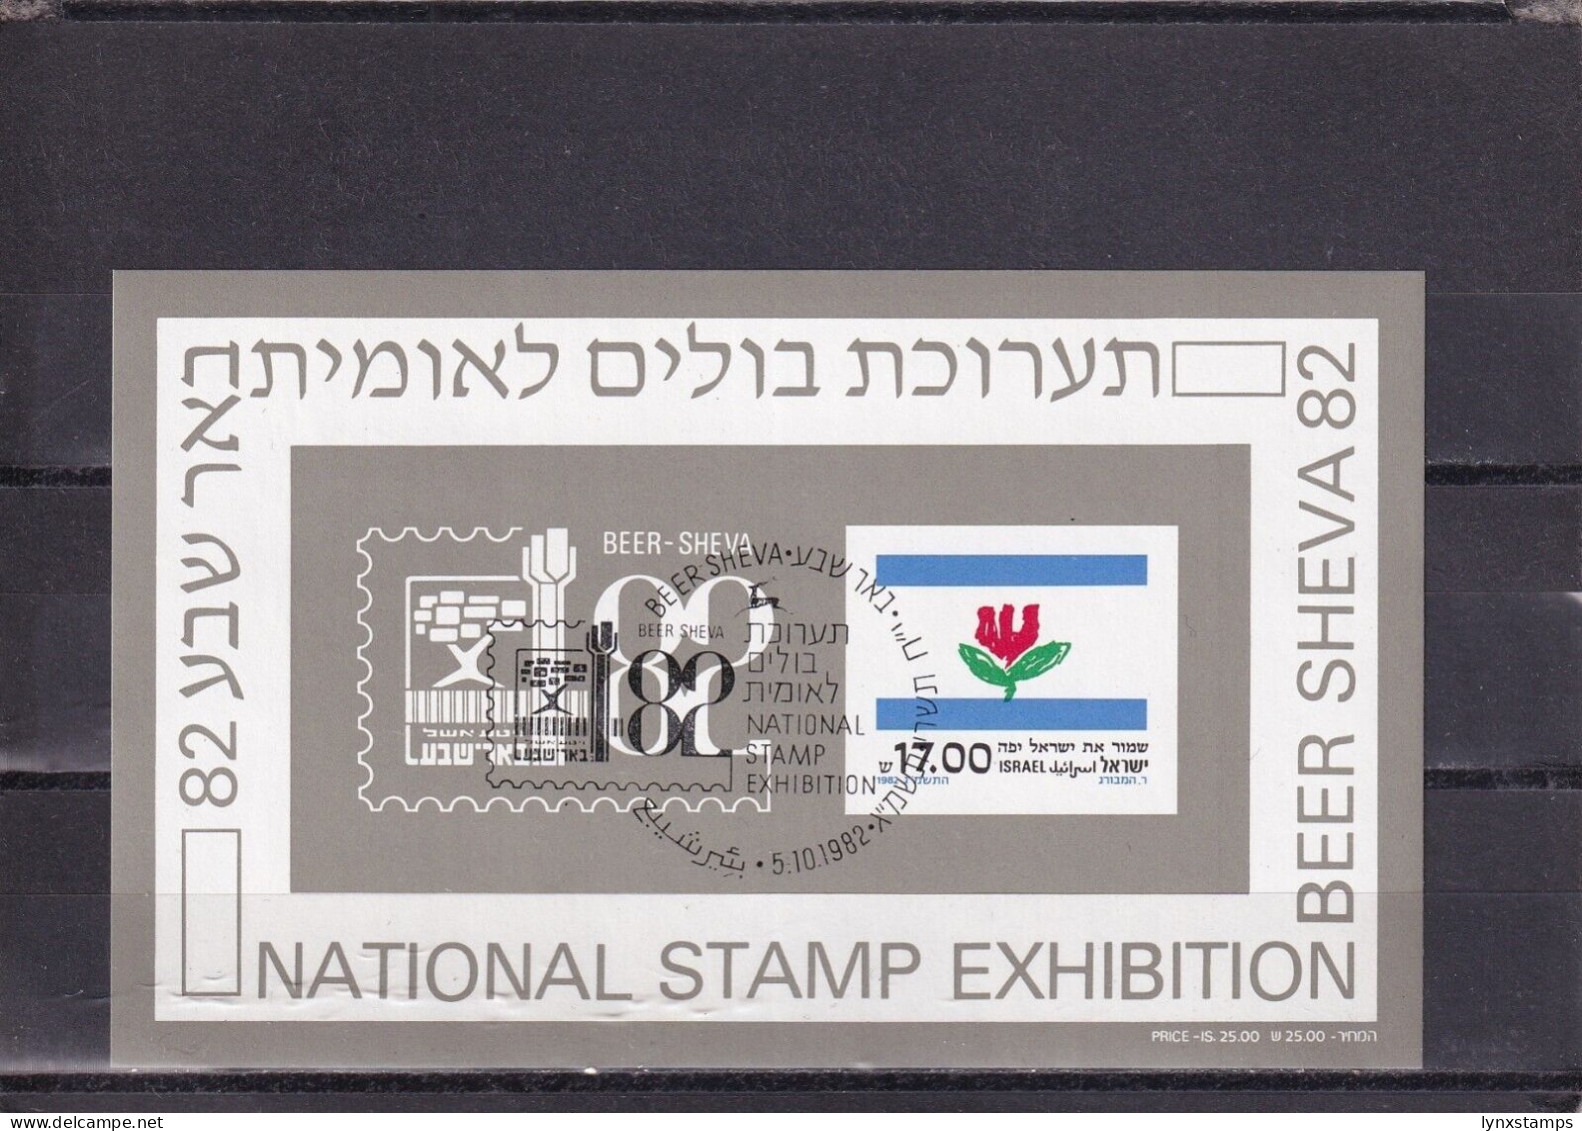 SA03 Israel 1982 National Stamp Ehibition Beer Sheva 82 Minisheet Imperf Used - Used Stamps (without Tabs)